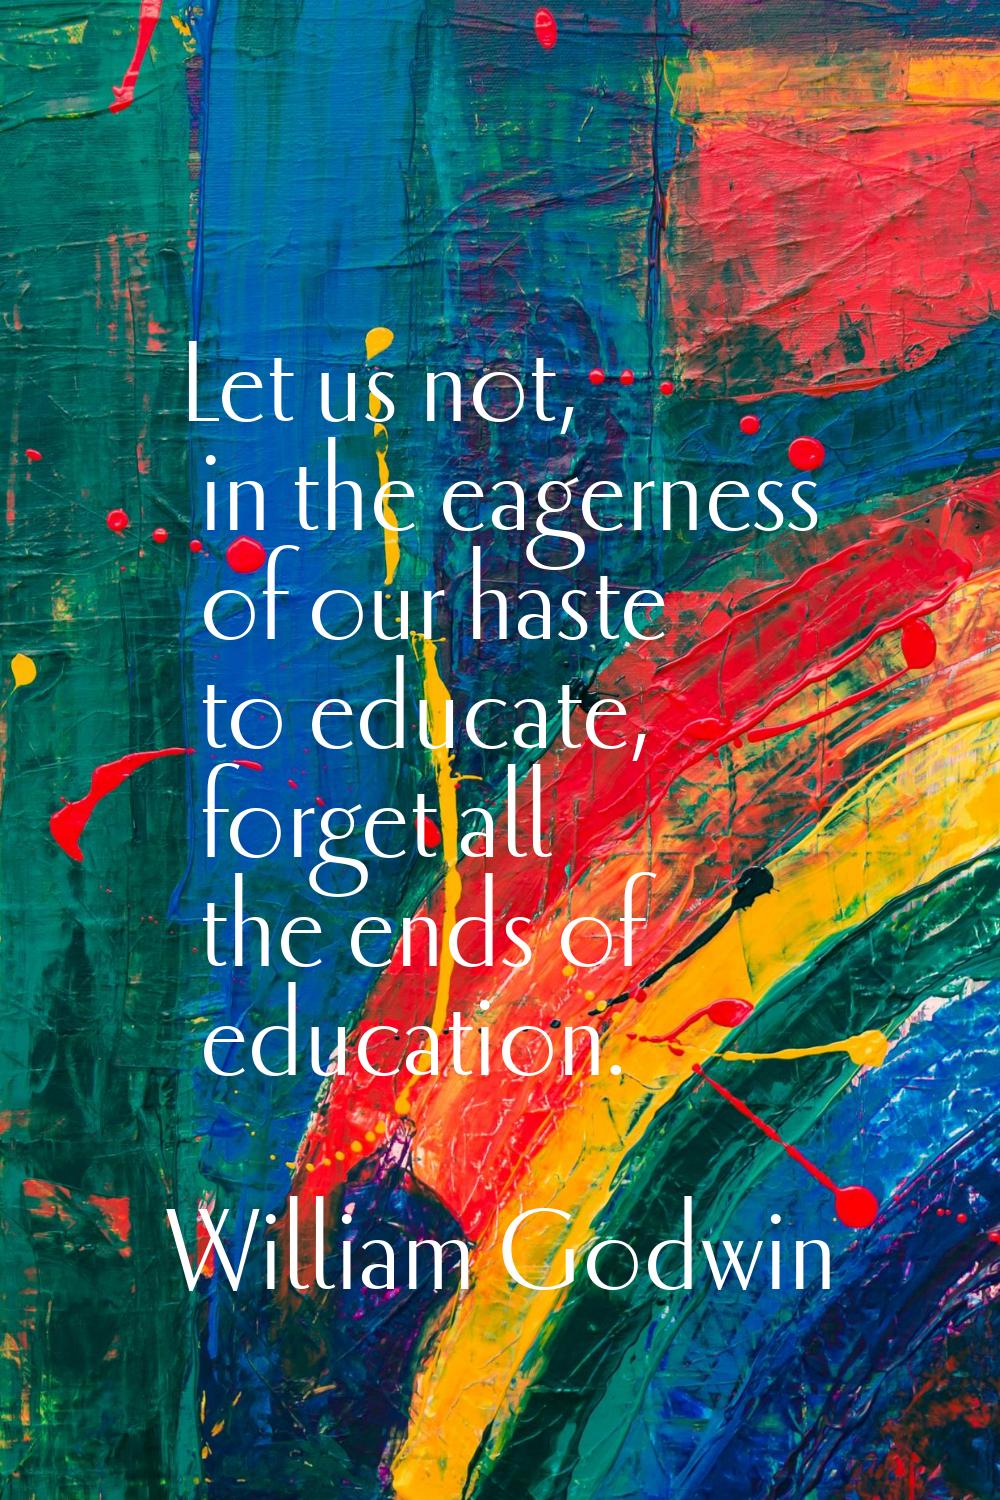 Let us not, in the eagerness of our haste to educate, forget all the ends of education.